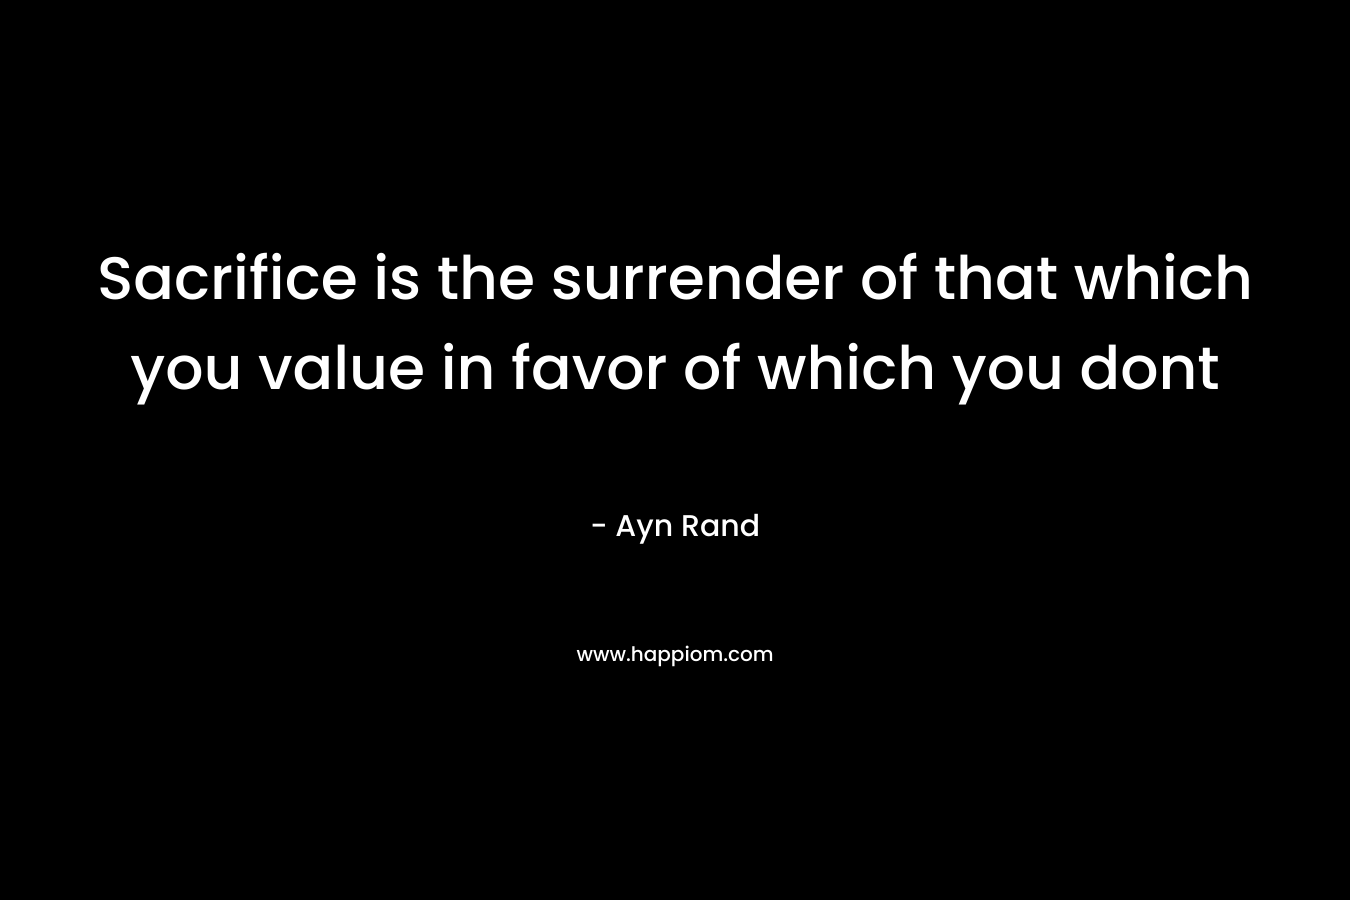 Sacrifice is the surrender of that which you value in favor of which you dont – Ayn Rand